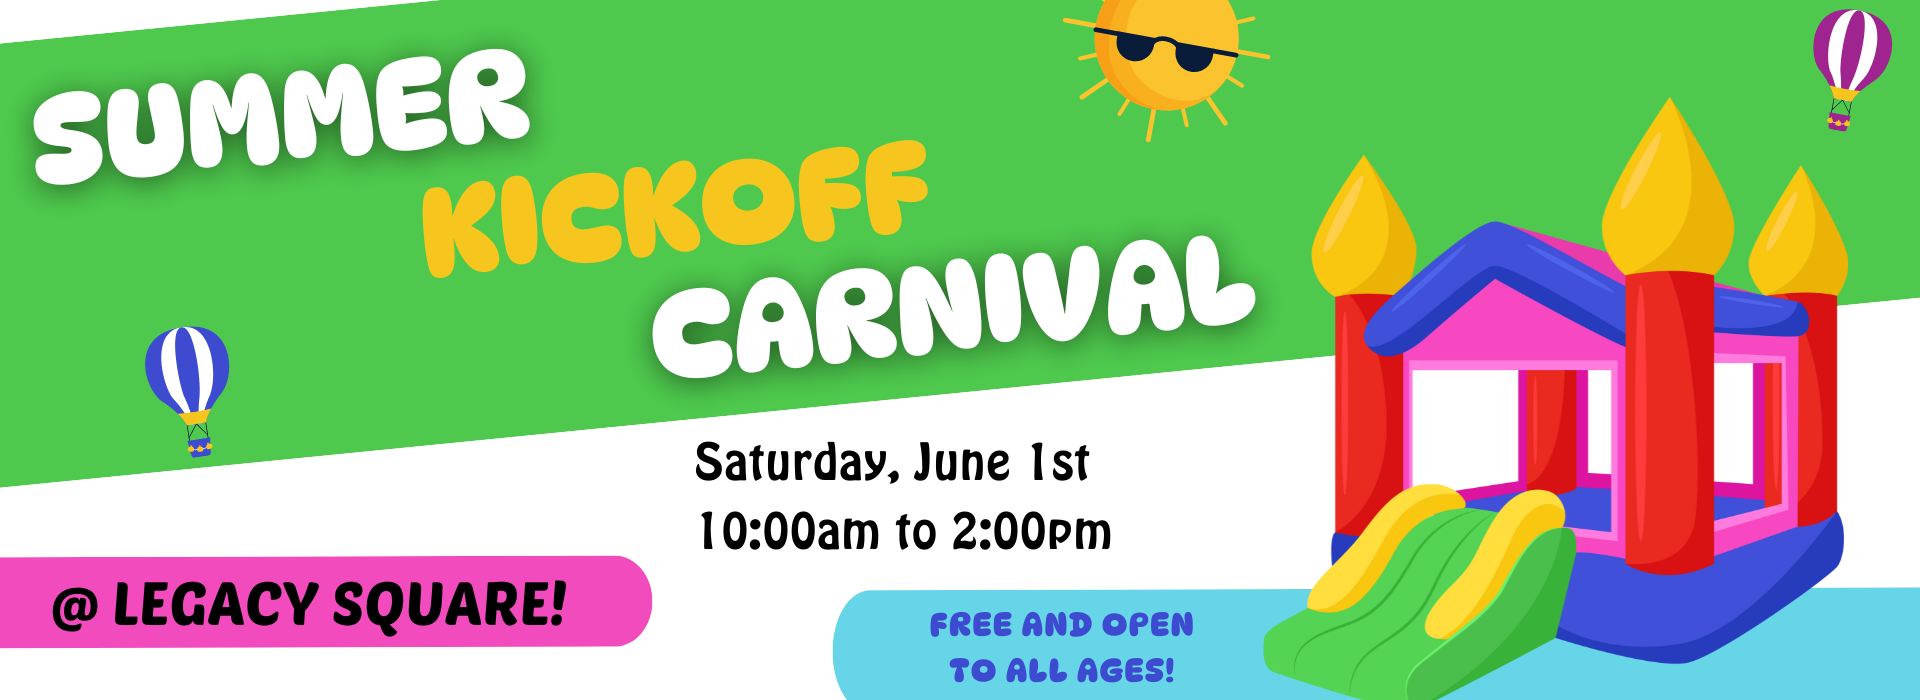 Kickoff Carnival June 1st from 10am to 2pm at Legacy Square